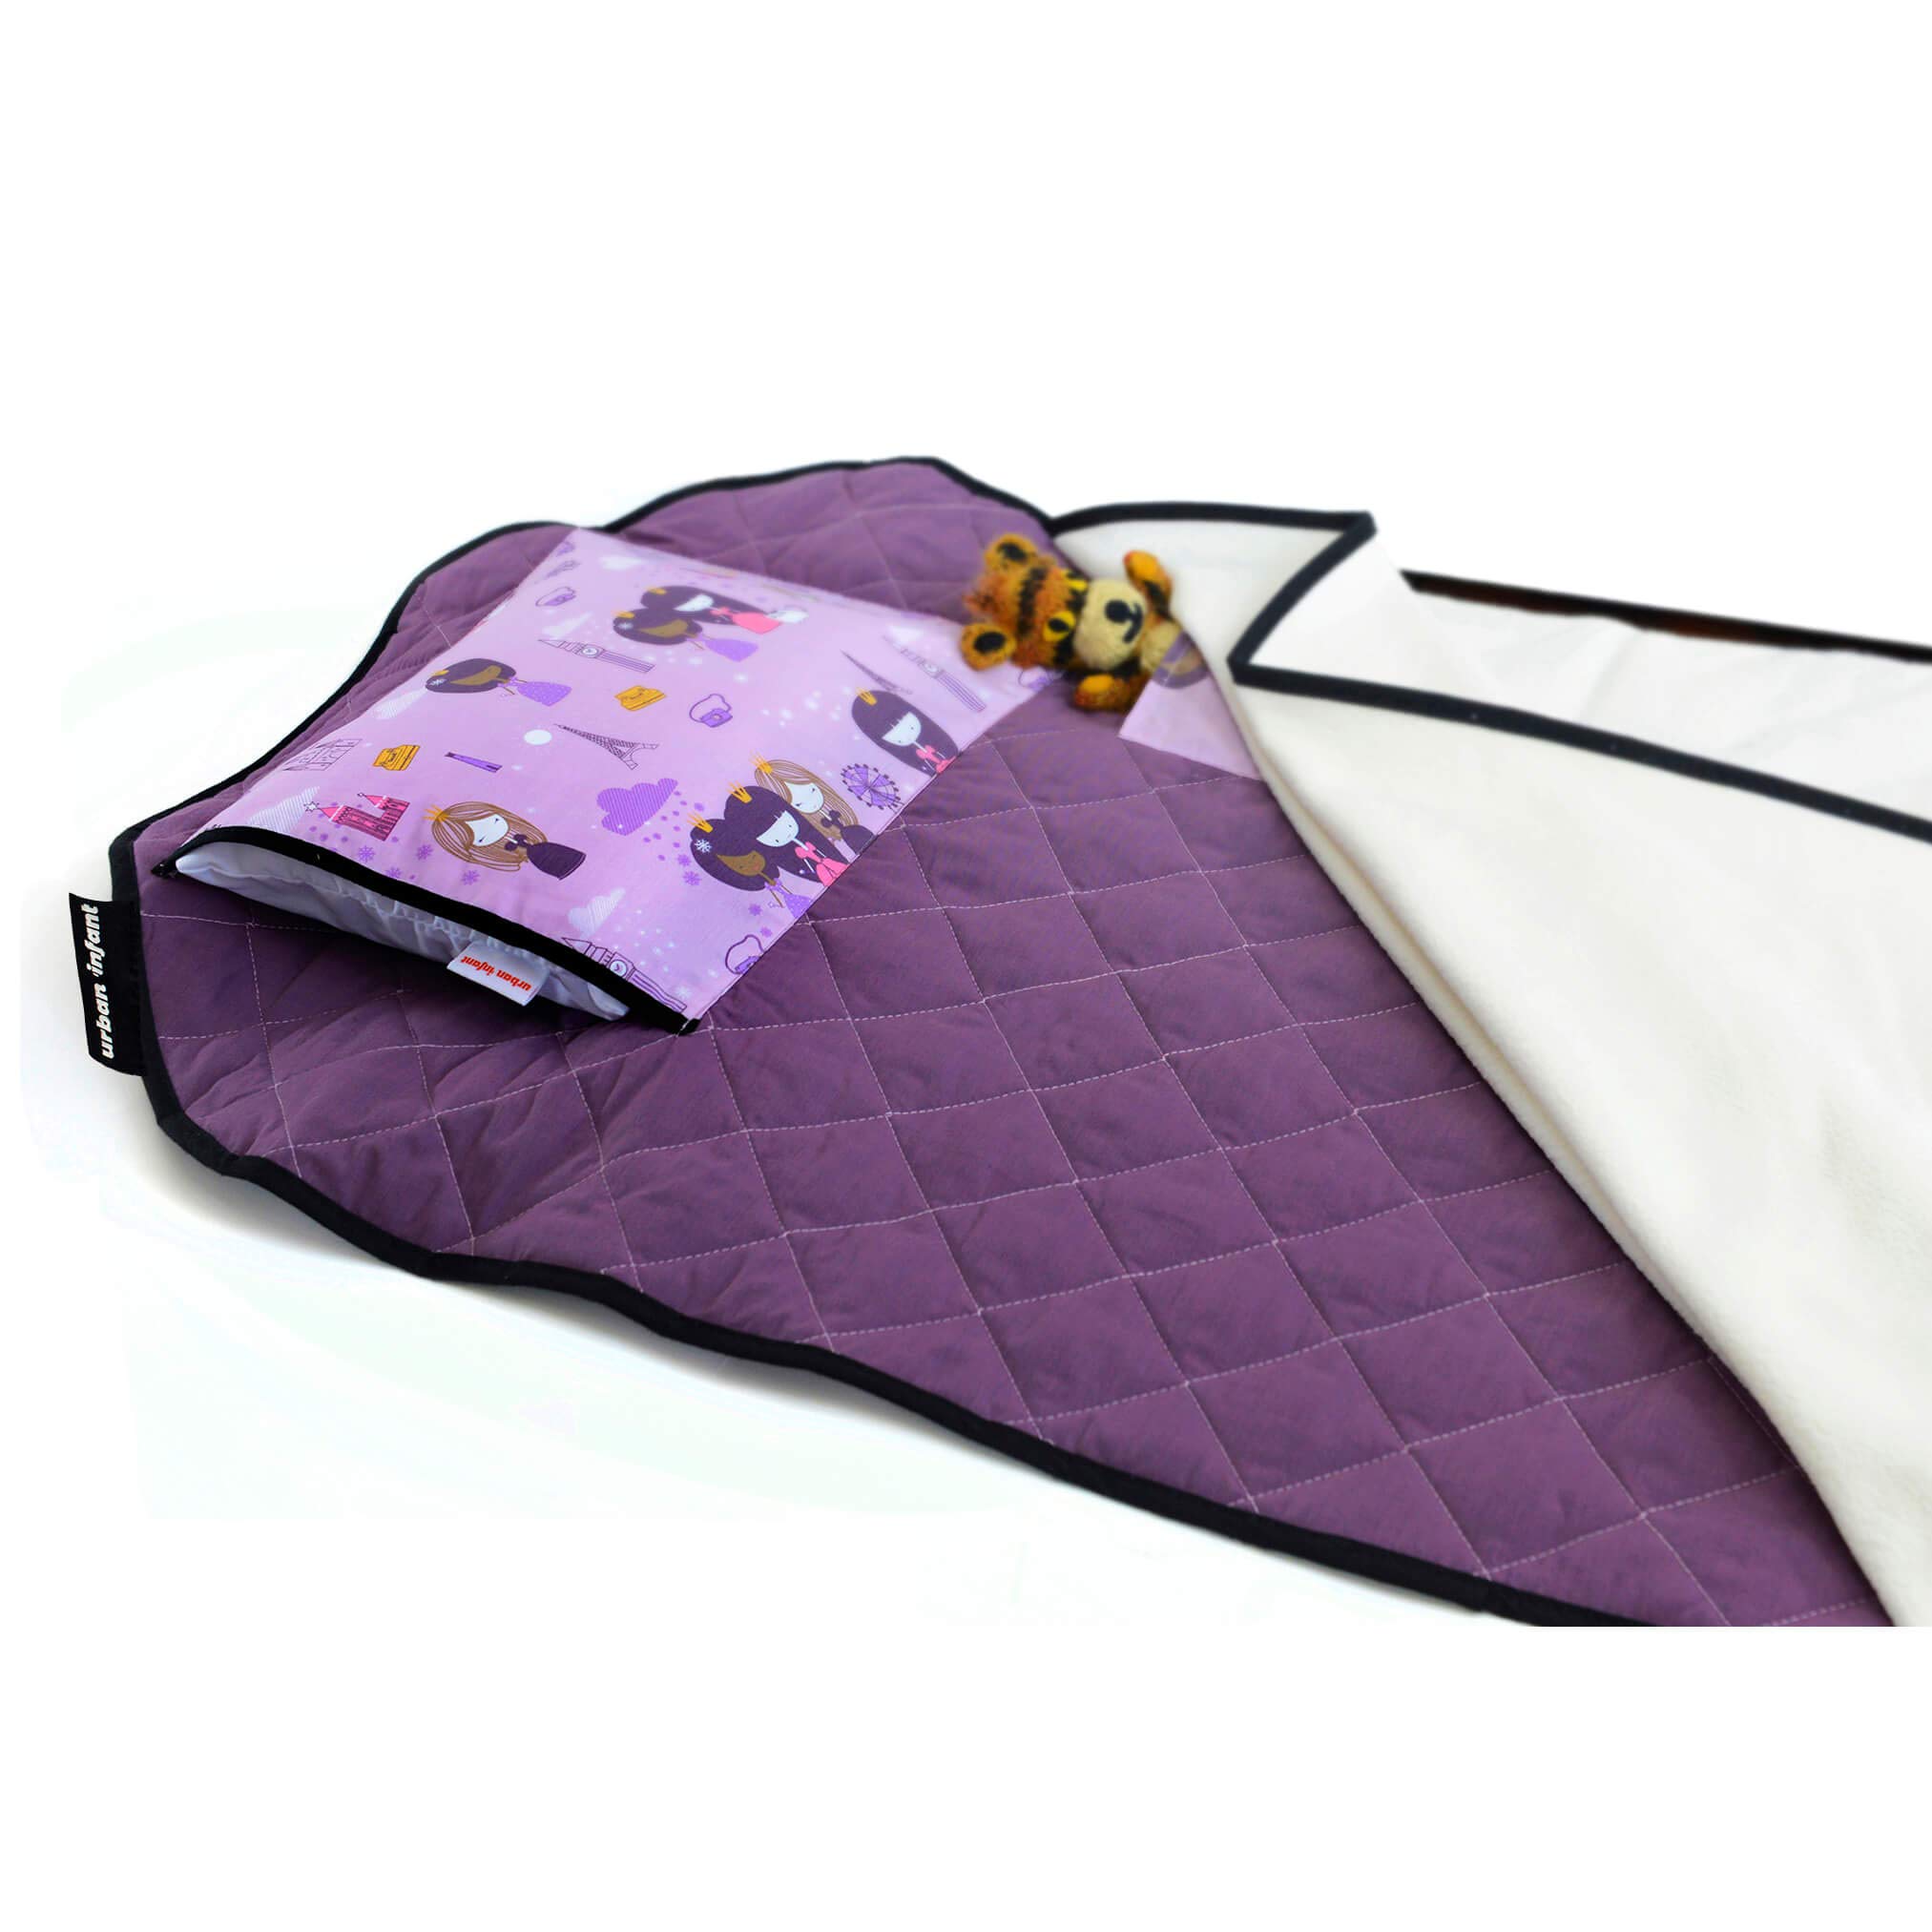 Urban Infant Tot cot Kids Nap Mat - Toddler Preschool Daycare Bedding cover with Blanket and Pillow - Violet